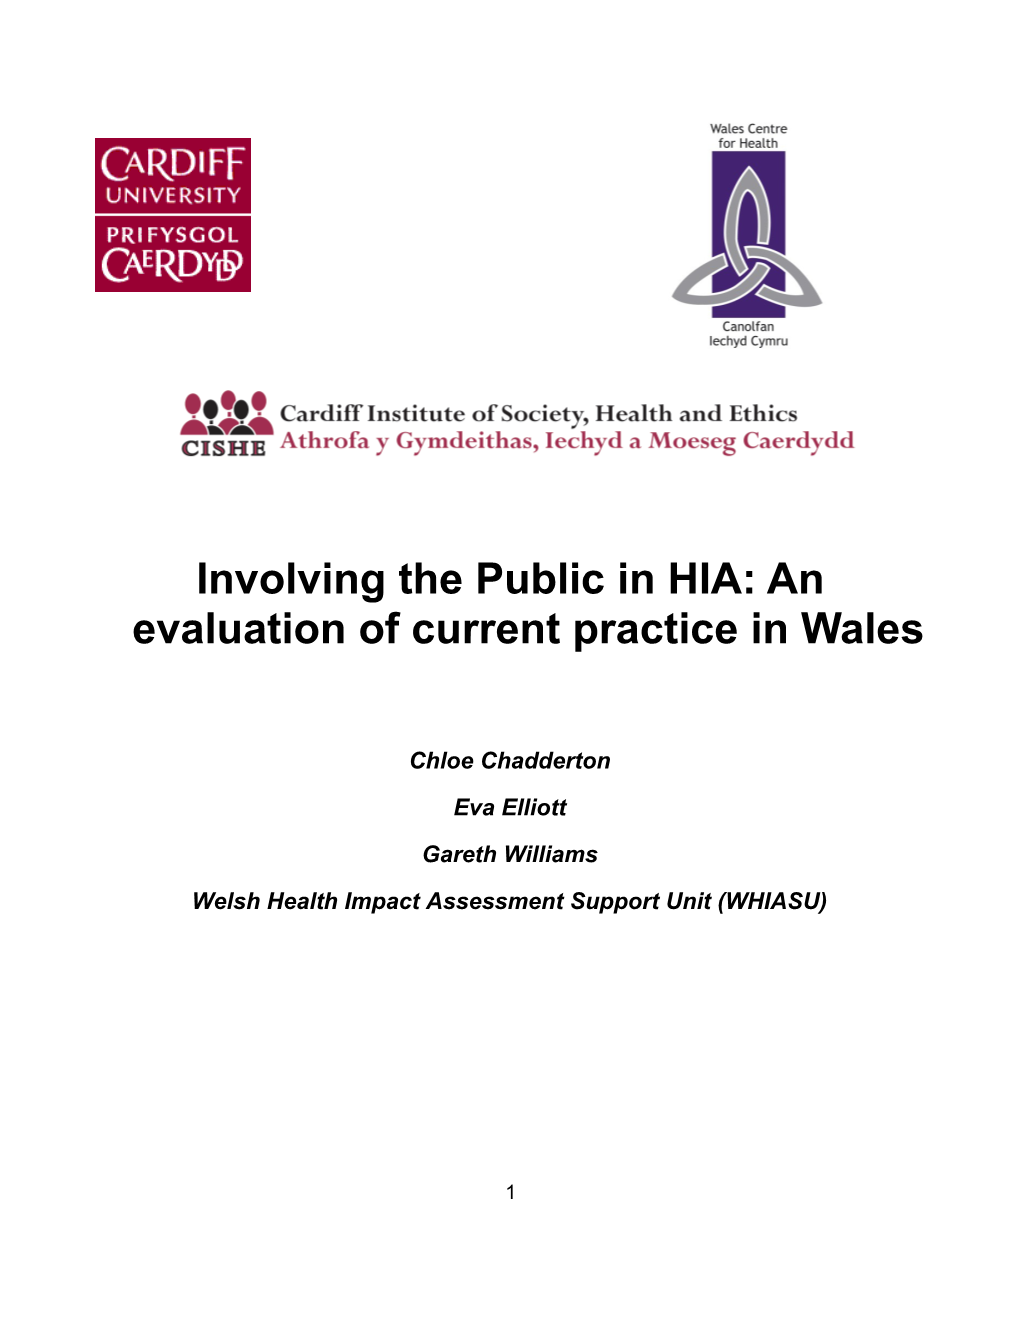 Introduction to the Notion of Public Participation in HIA